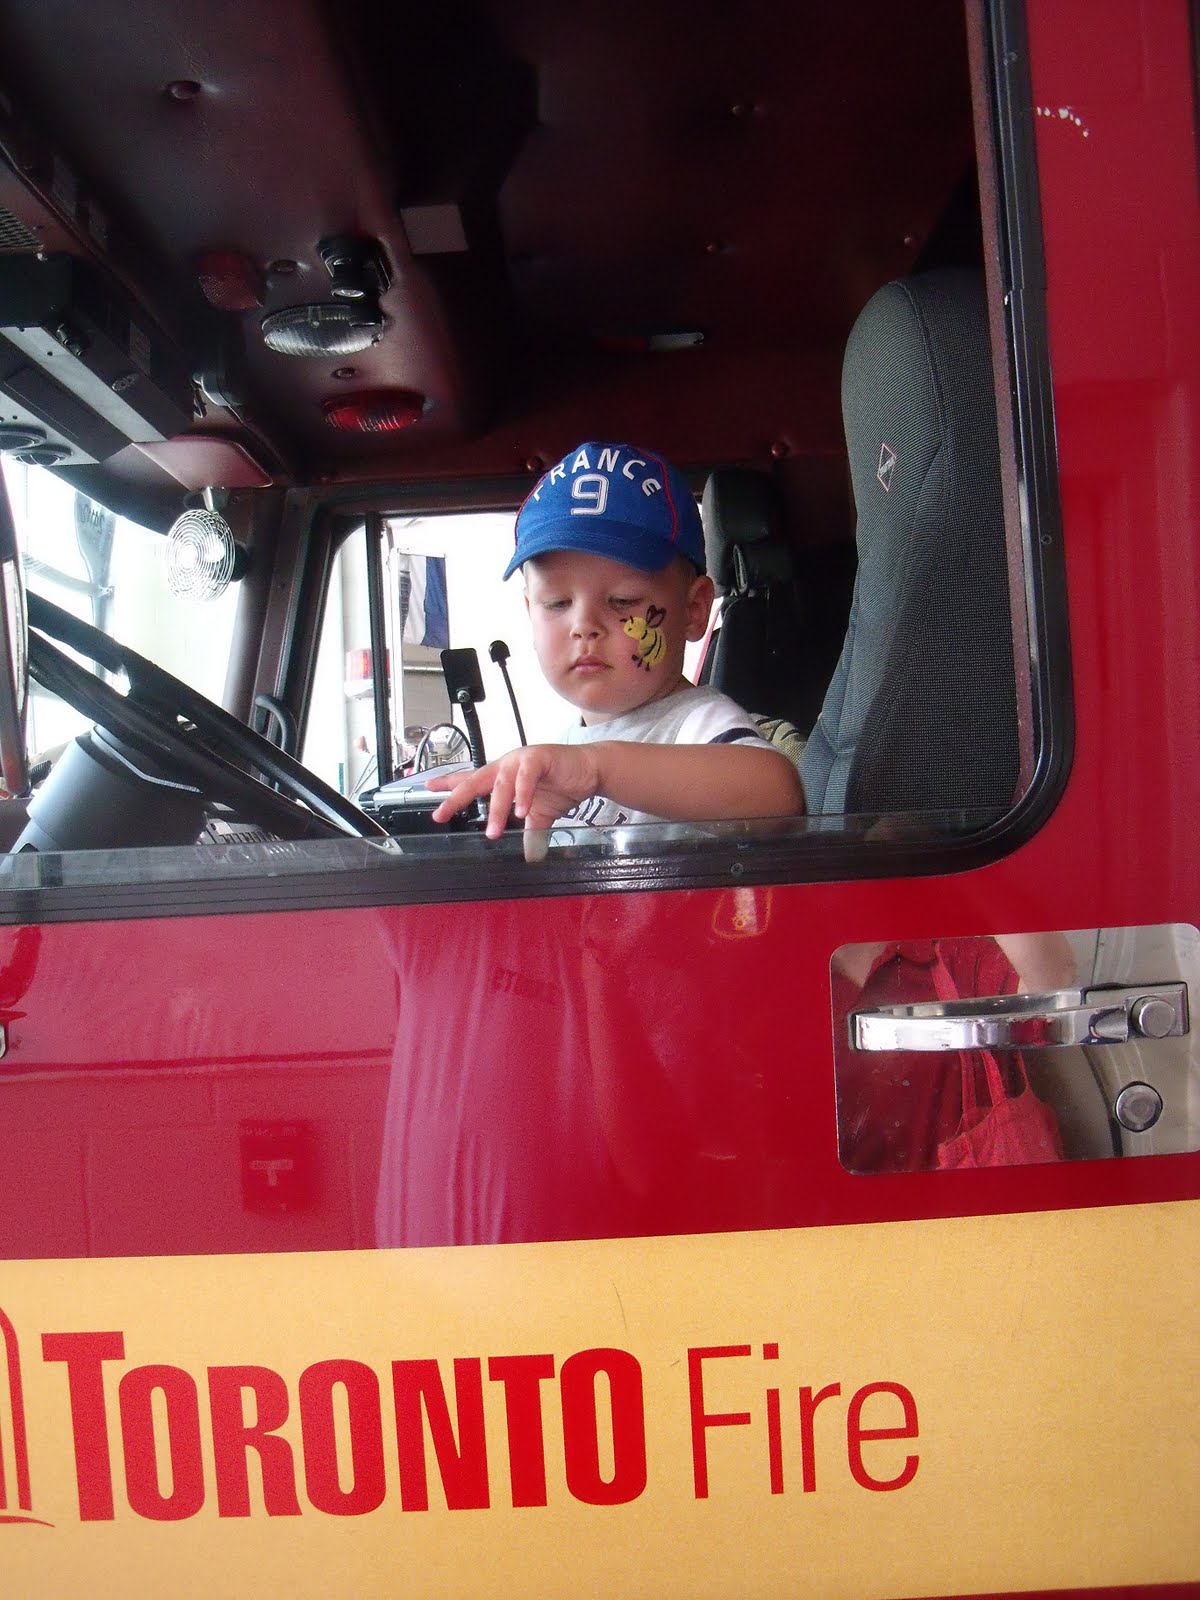 real Toronto Fire truck!